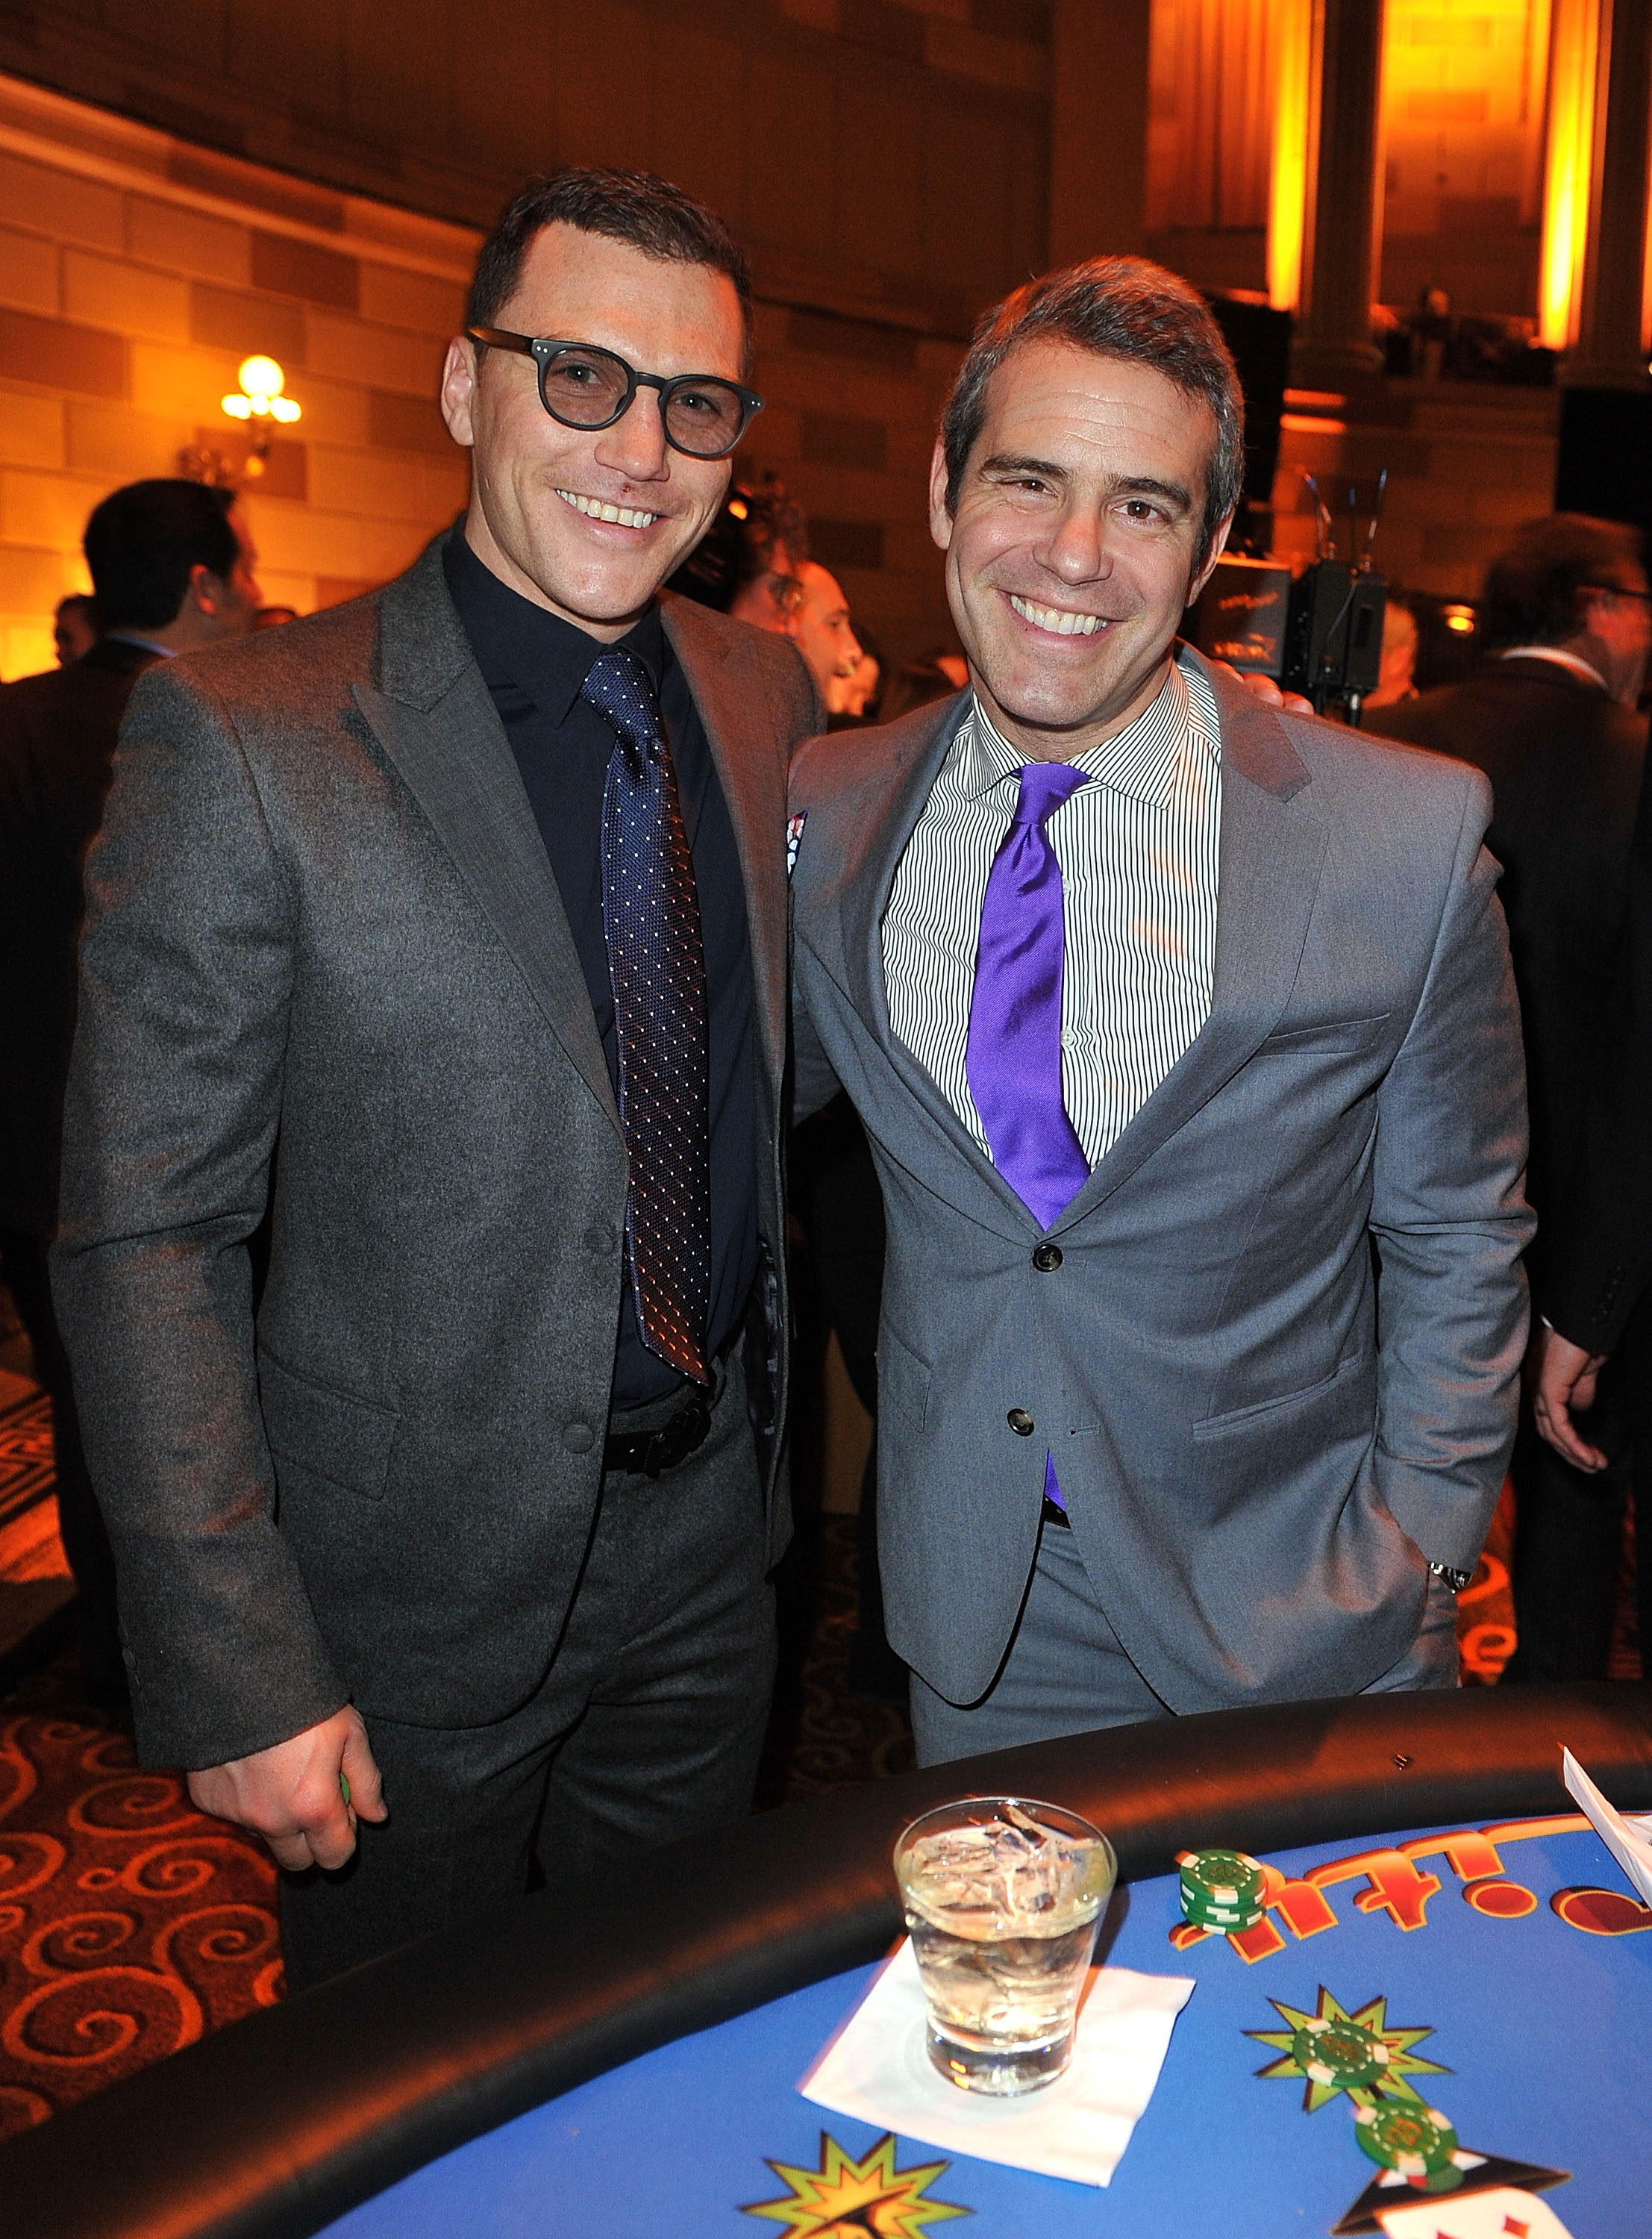 Sean Avery and Andy Cohen at the New York Rangers Casino Night on February 15, 2011, in New York City | Source: Getty Images